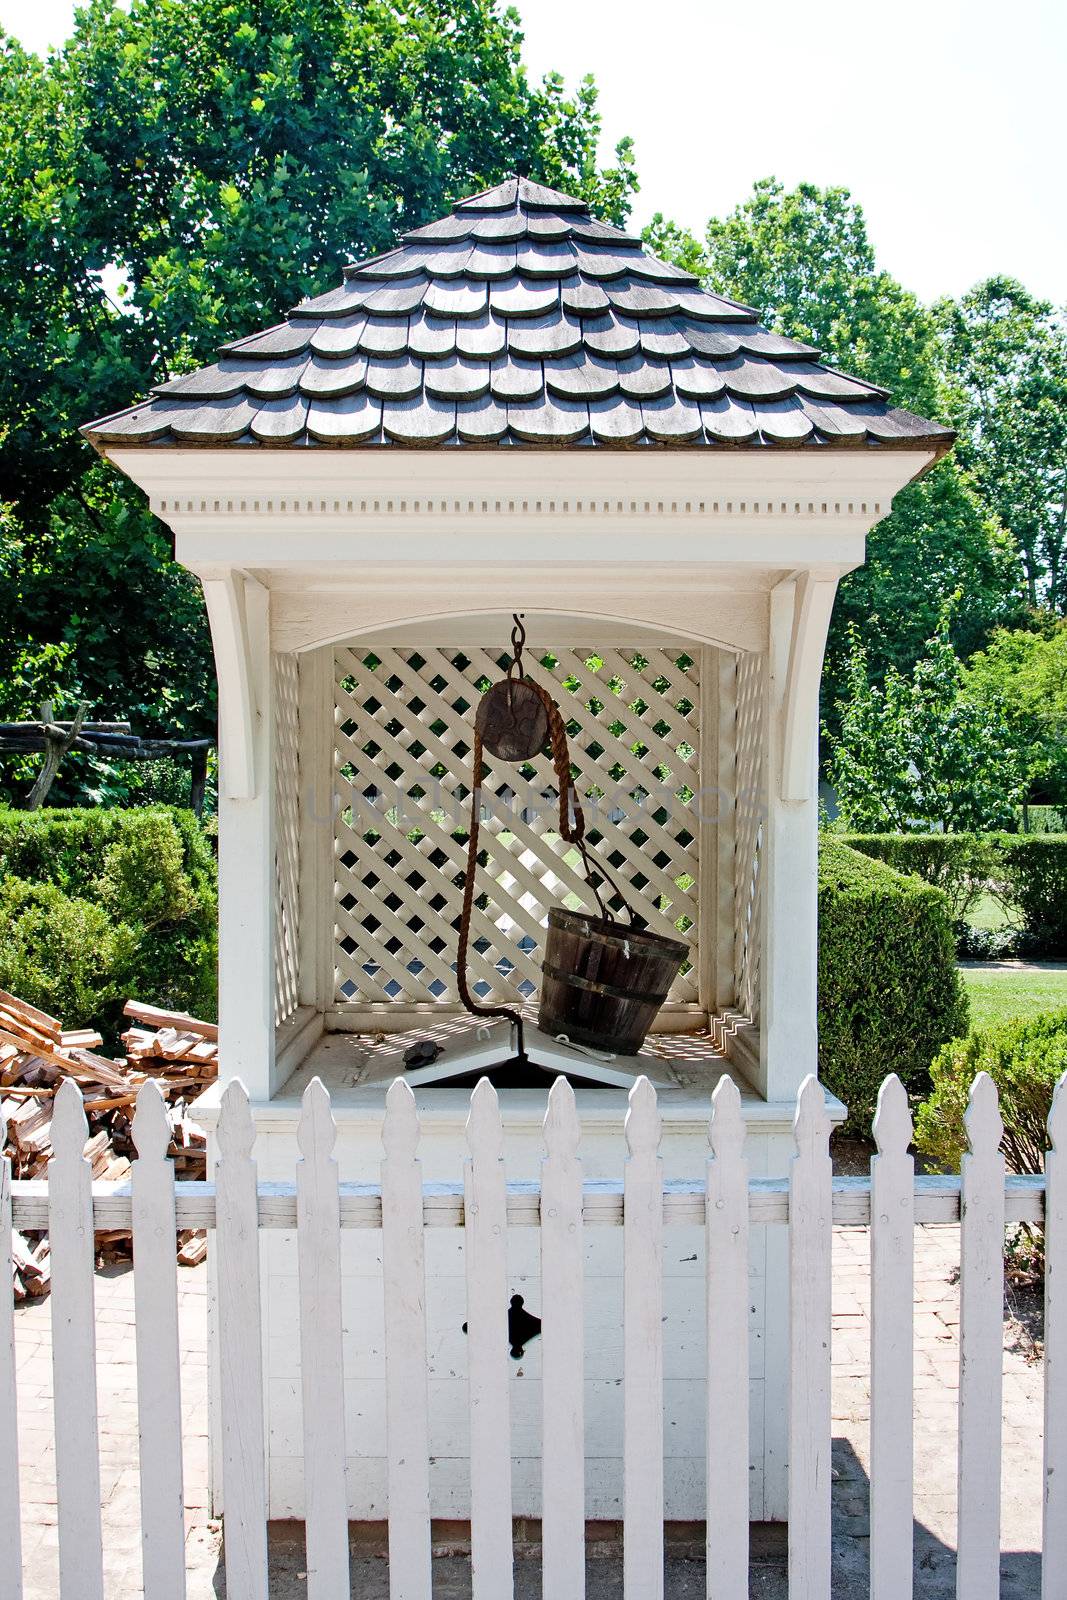 A white wishing water well in Colonial style with wooden bucket on top and roof with shingles behind a white picket fence in a garden.